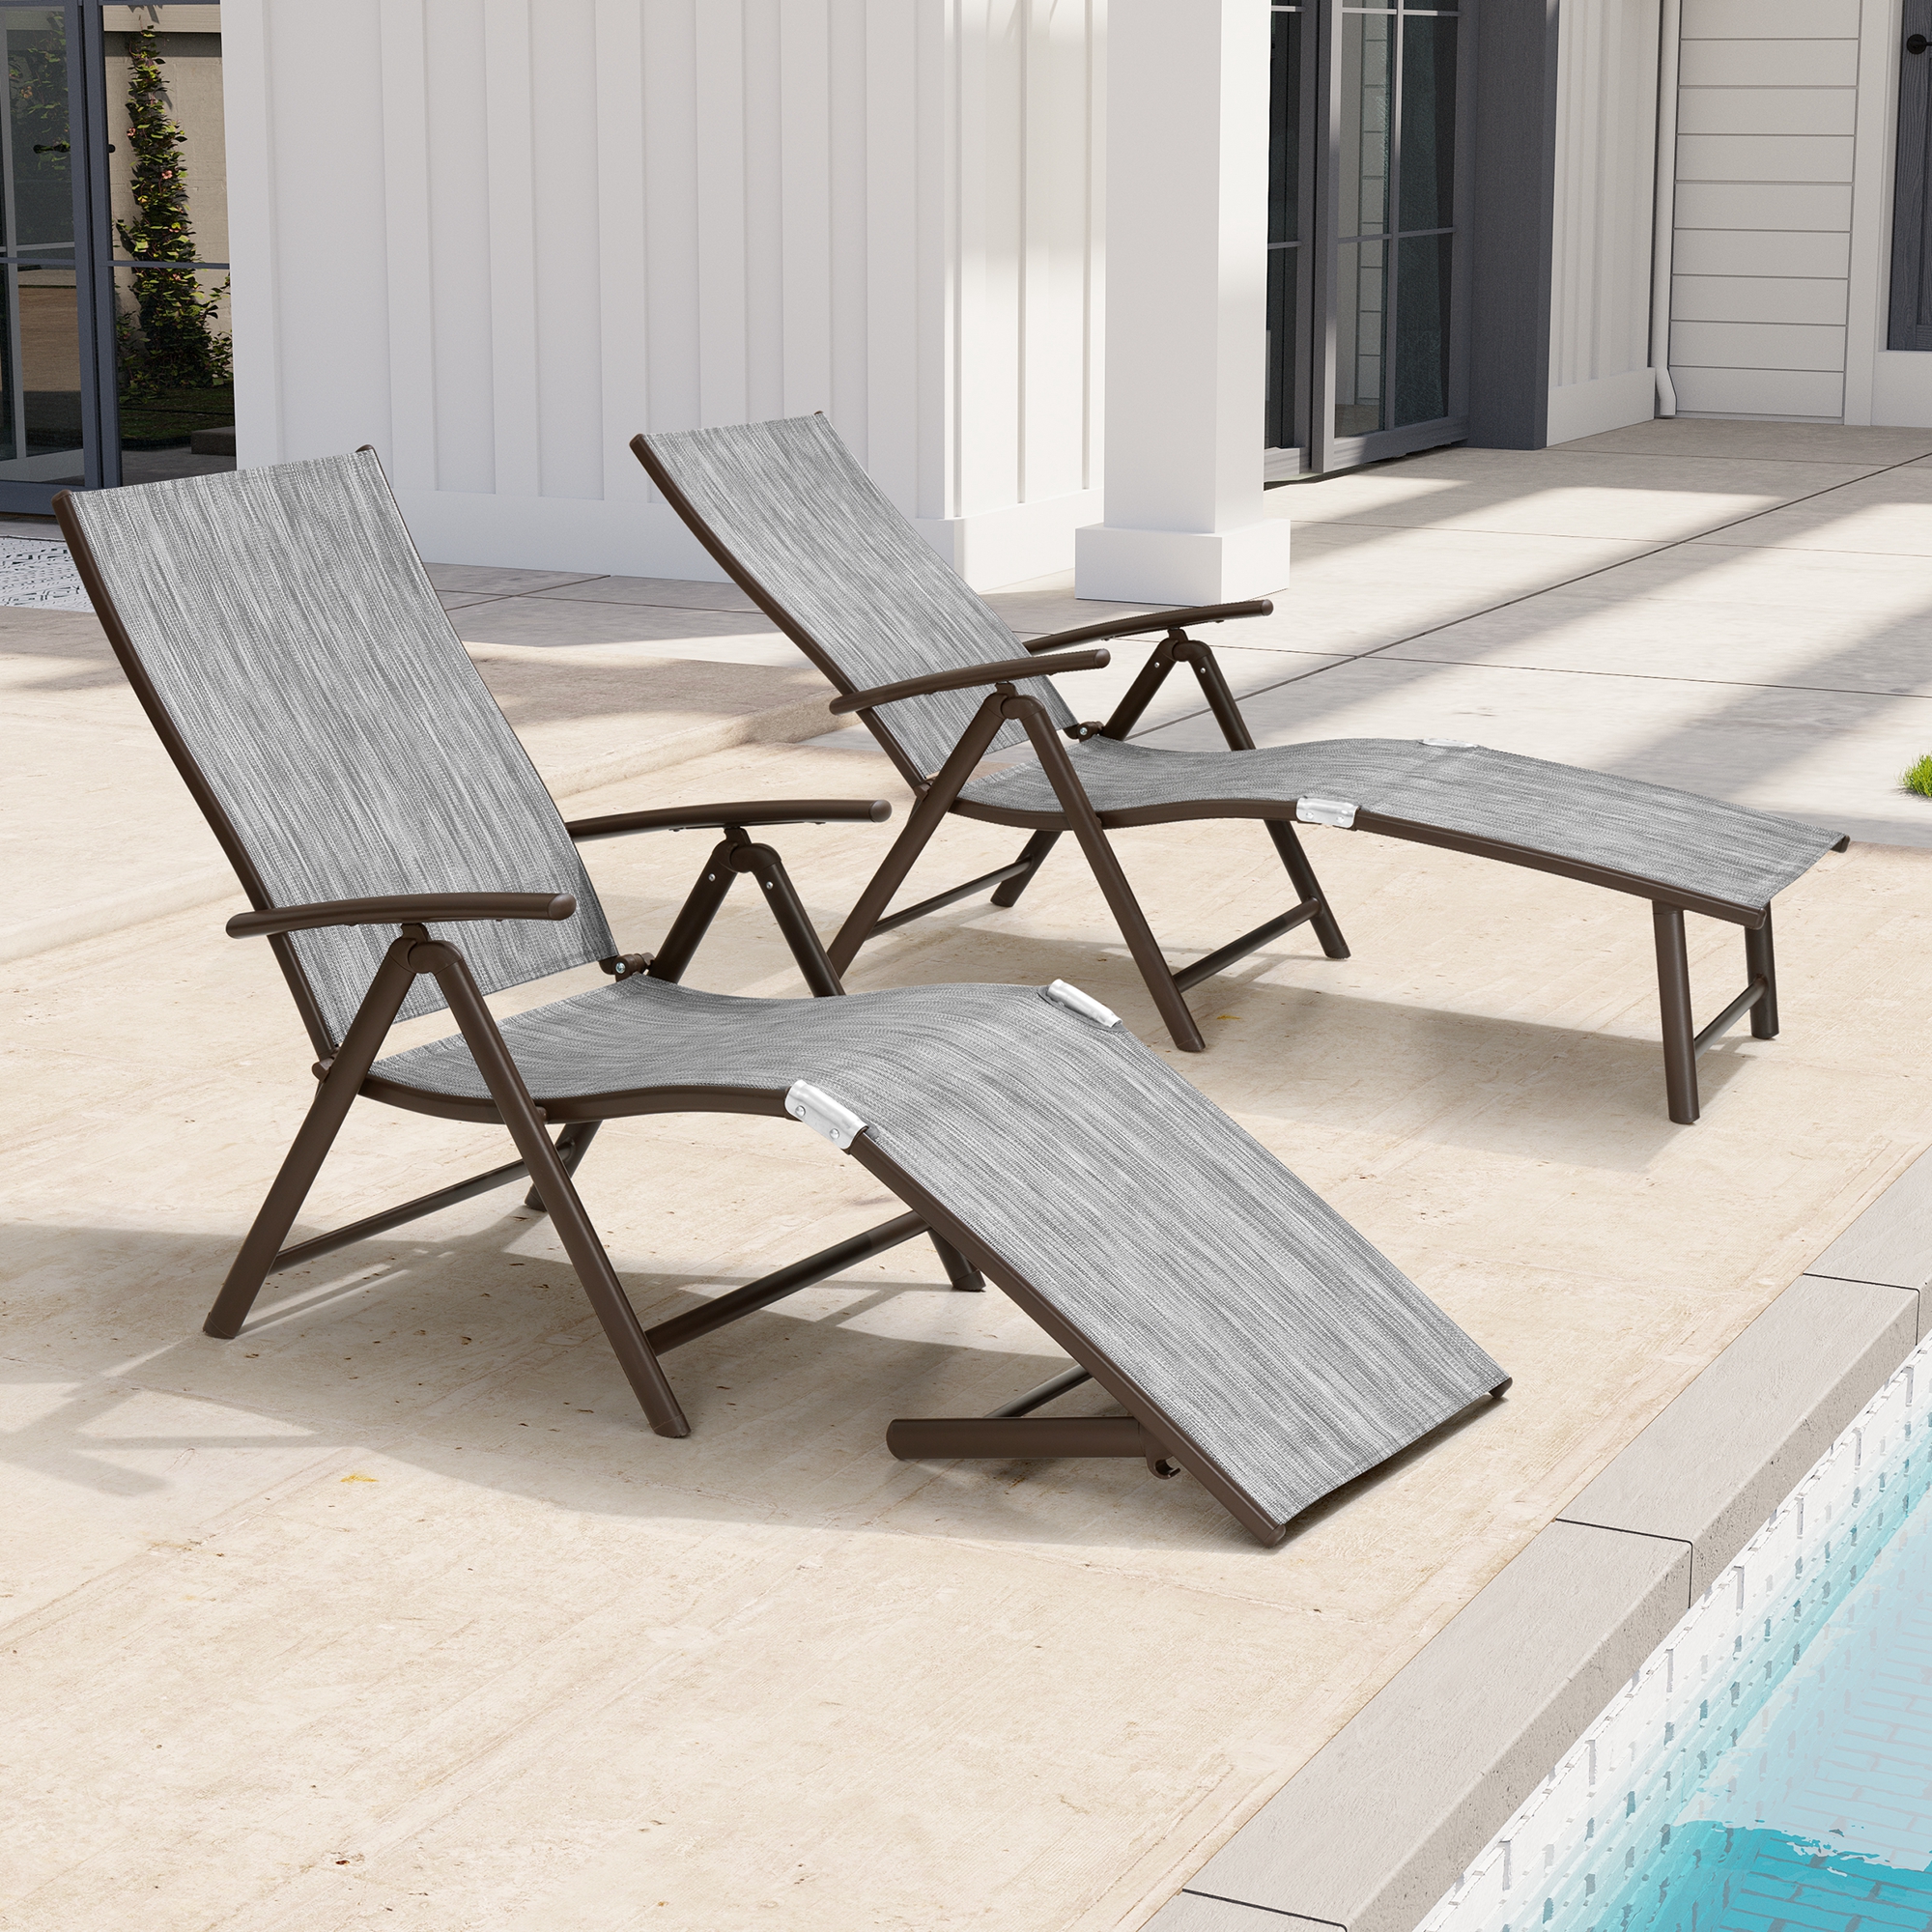 Pellebant Set of 2 Outdoor Chaise Lounge Aluminum Patio Folding Chairs,Gray - image 3 of 7